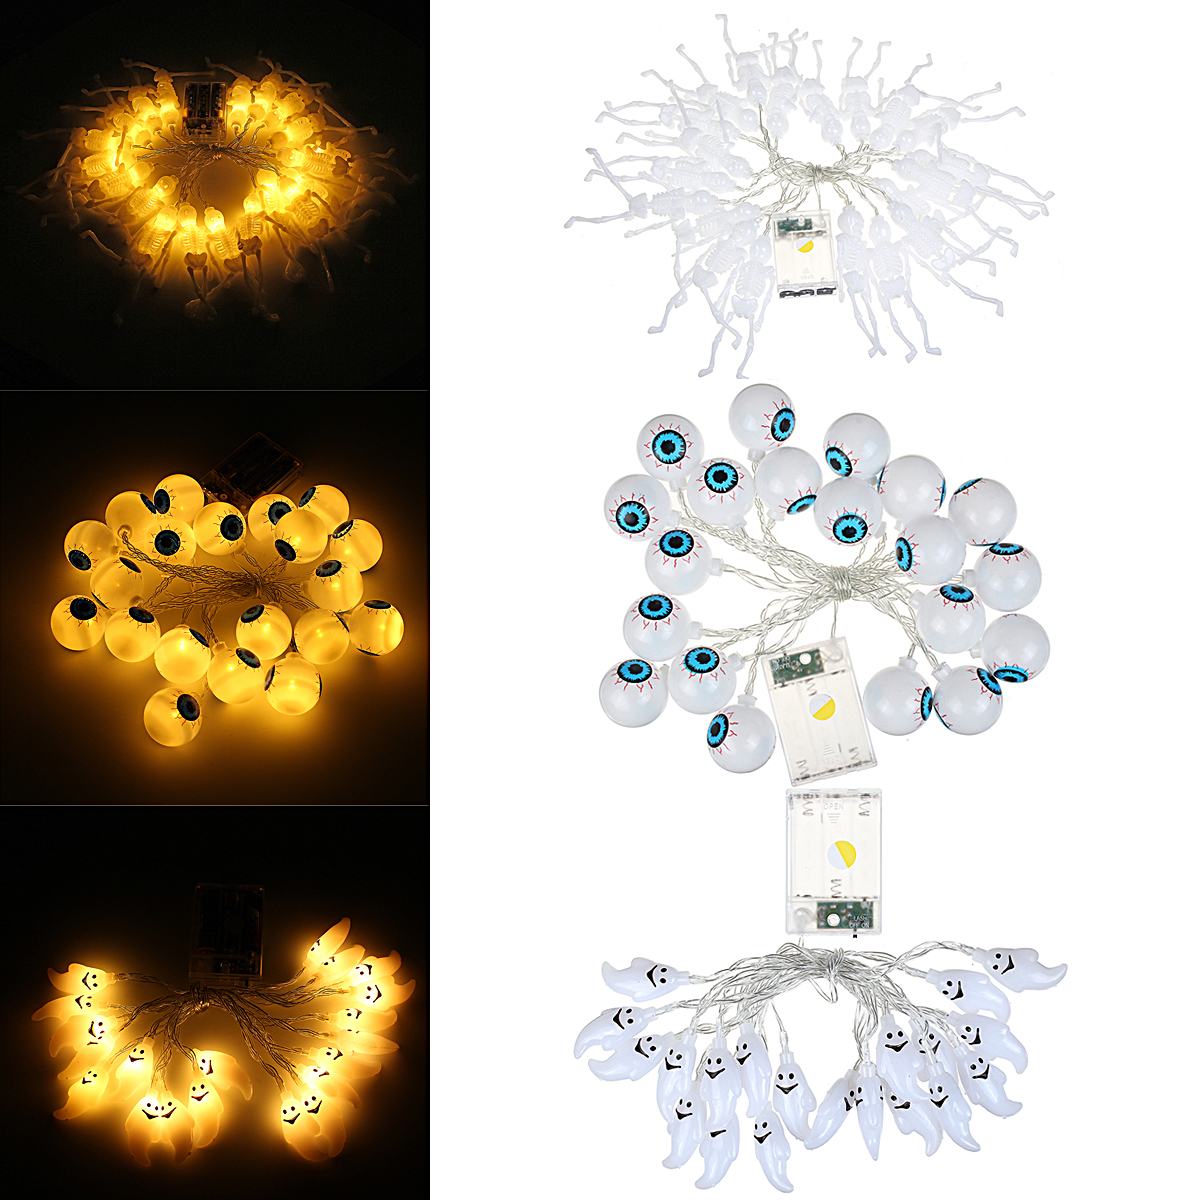 Specter-Skeleton-Ghost-Eyes-Pattern-Halloween-LED-String-Light-Holiday-Funny-Party-Outdoor-Indoor-De-1567228-1